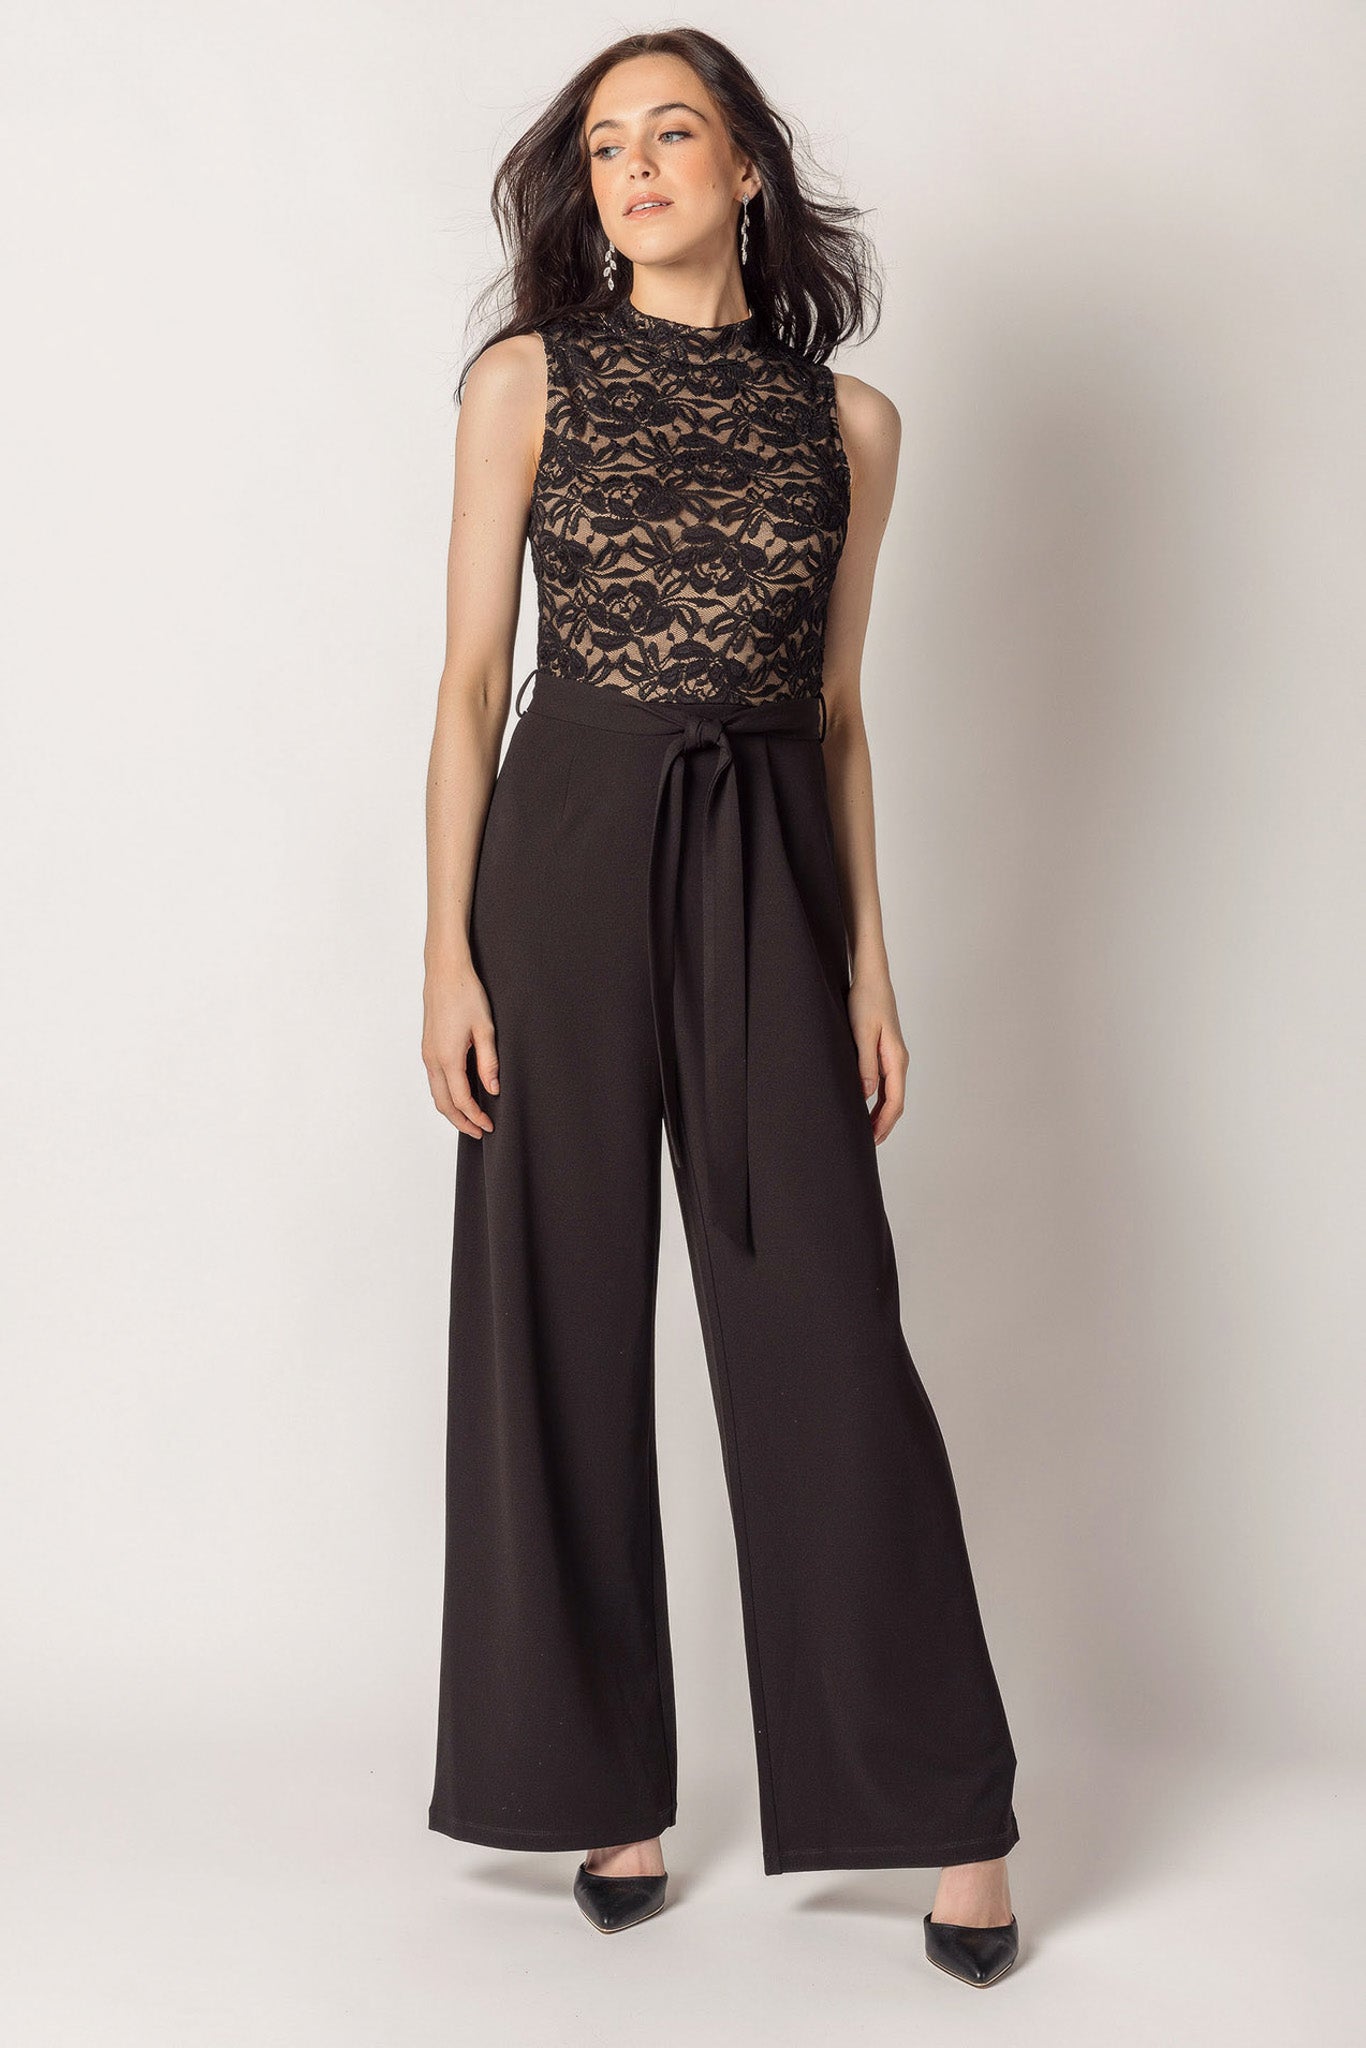 Sleeveless Lace Jumpsuit with Tie-Belt